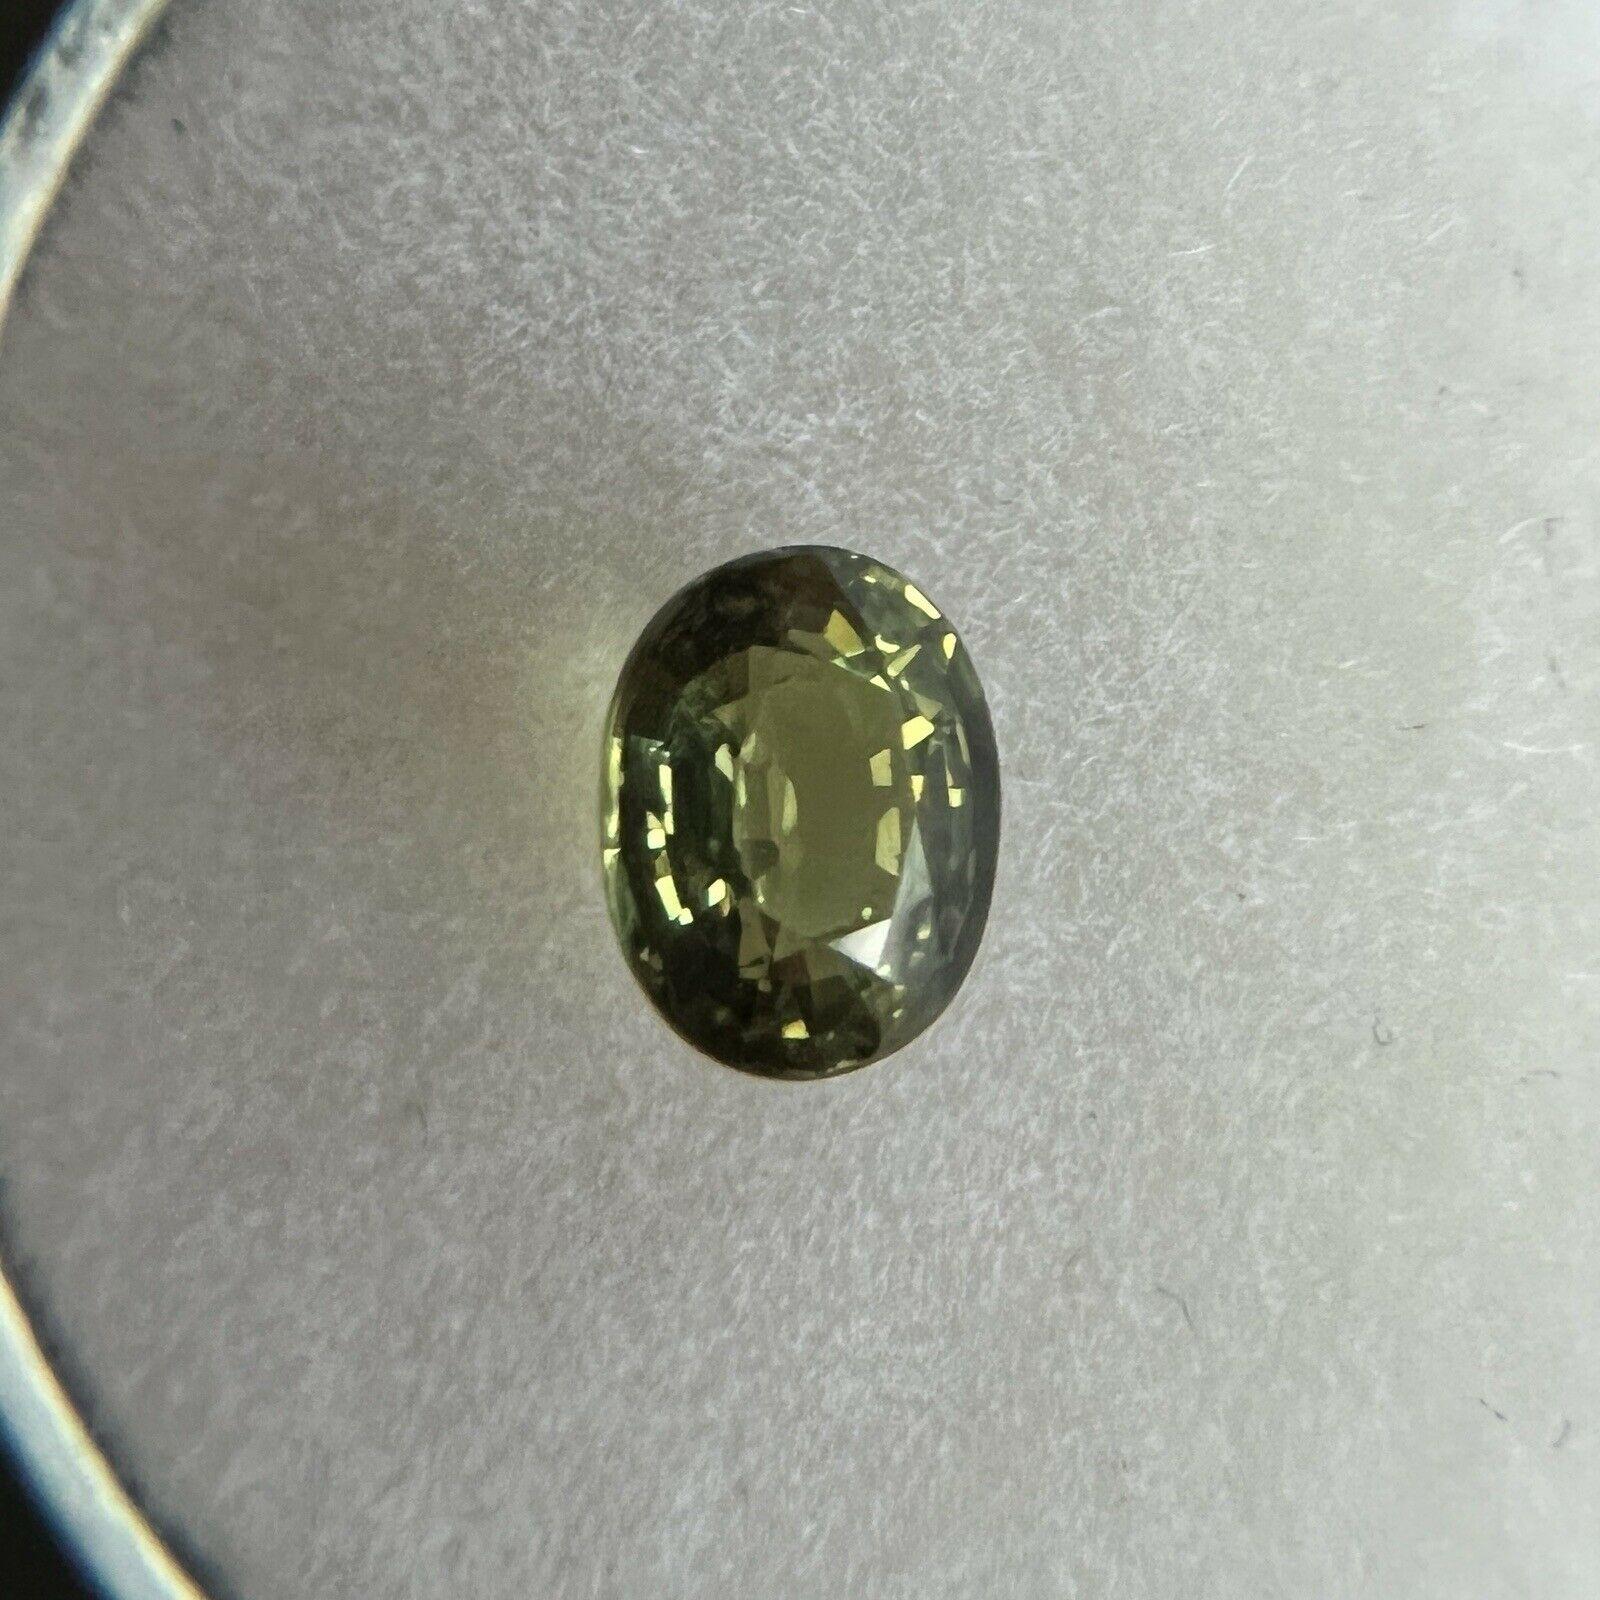 0.94ct Green Yellow Australian Sapphire Untreated Oval Cut 6 x 4.7mm No Heat

Fine Natural Yellow Green Sapphire Gemstone. 
0.94 Carat with a beautiful vivid green yellow colour and excellent clarity, a very clean stone. 
Also has an excellent oval